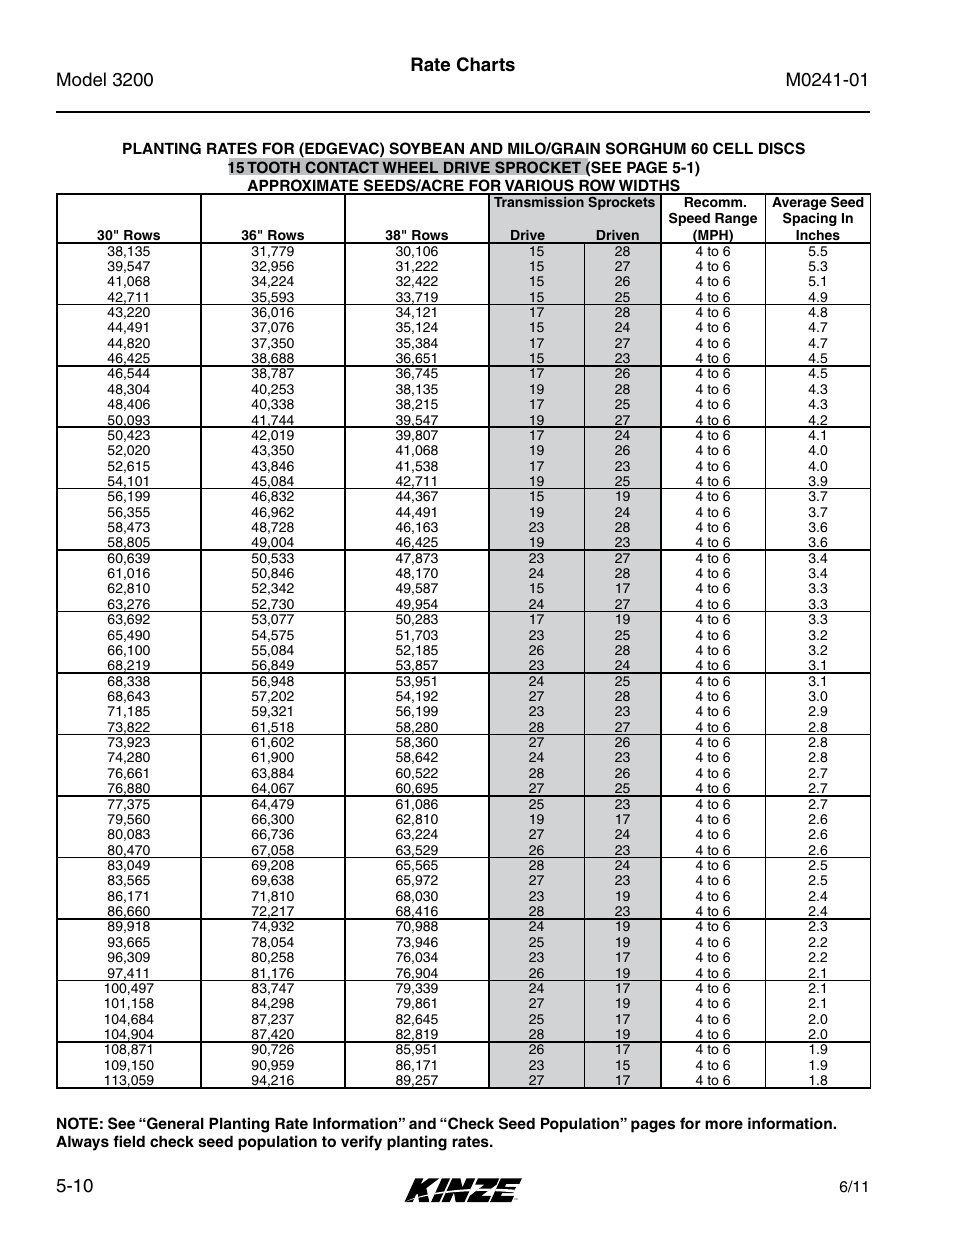 Rate charts | Kinze 3200 Wing-Fold Planter Rev. 7/14 User Manual | Page 76 / 192